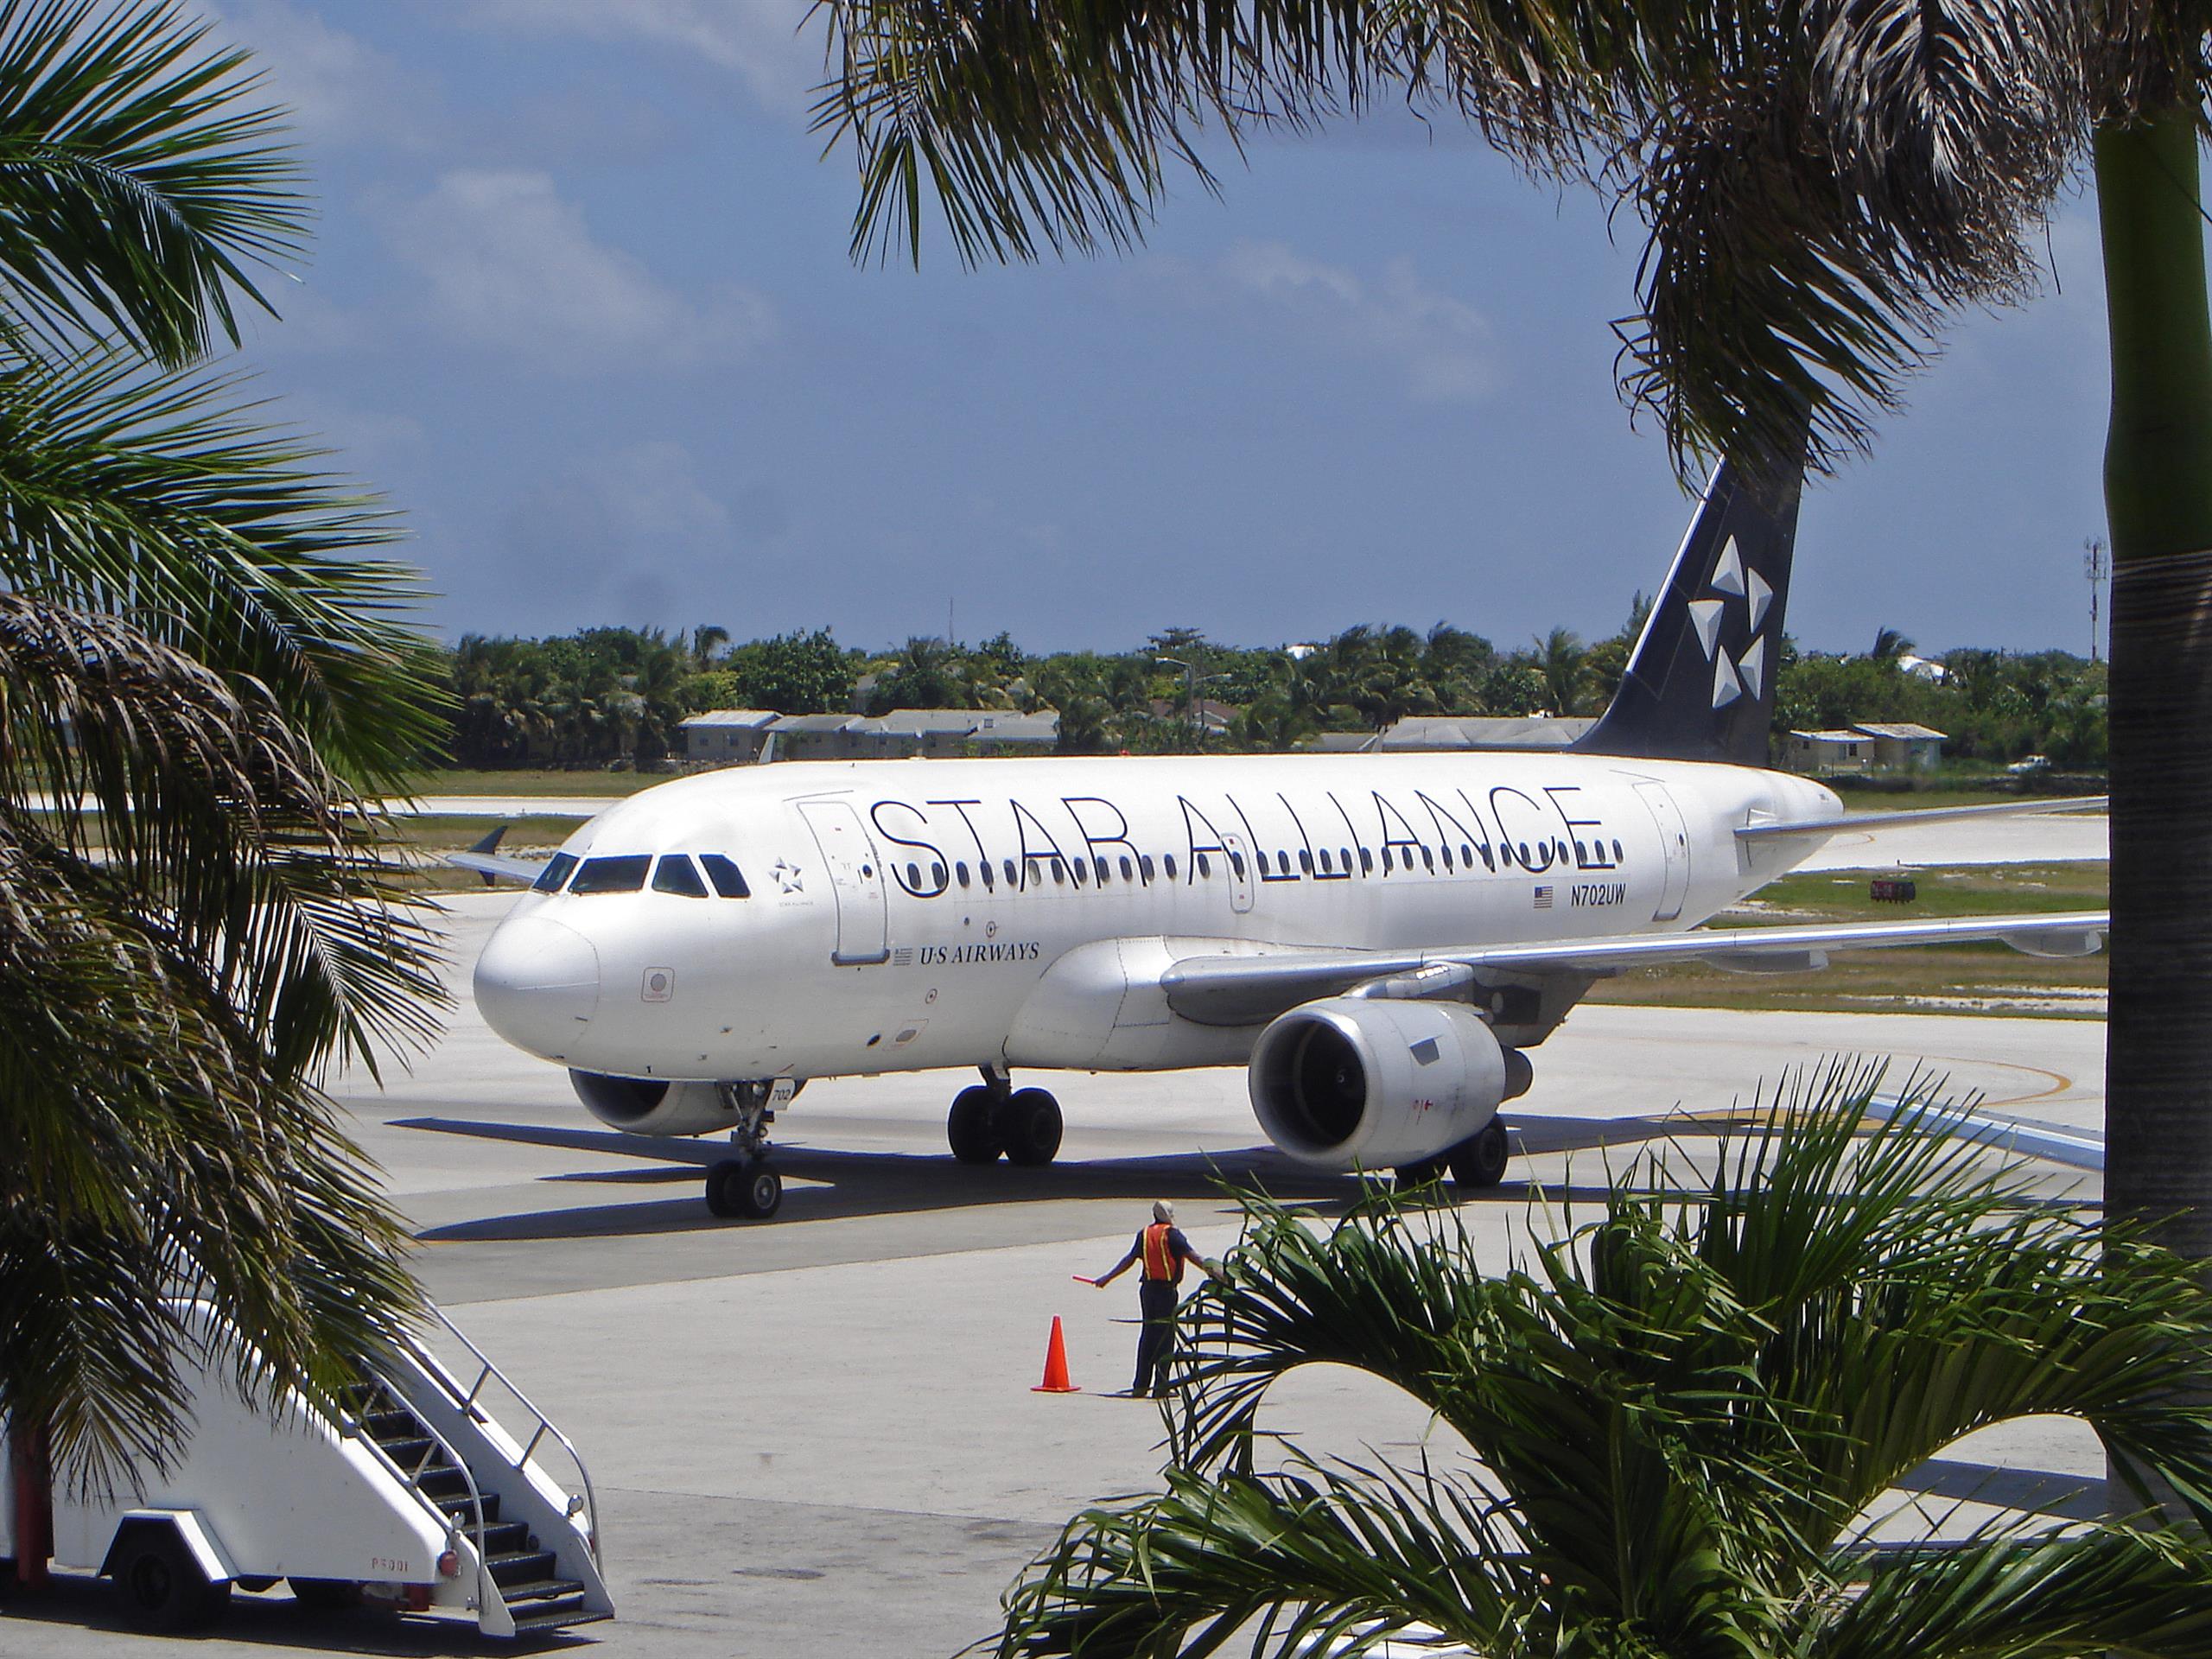 Front view of Star Alliance plane